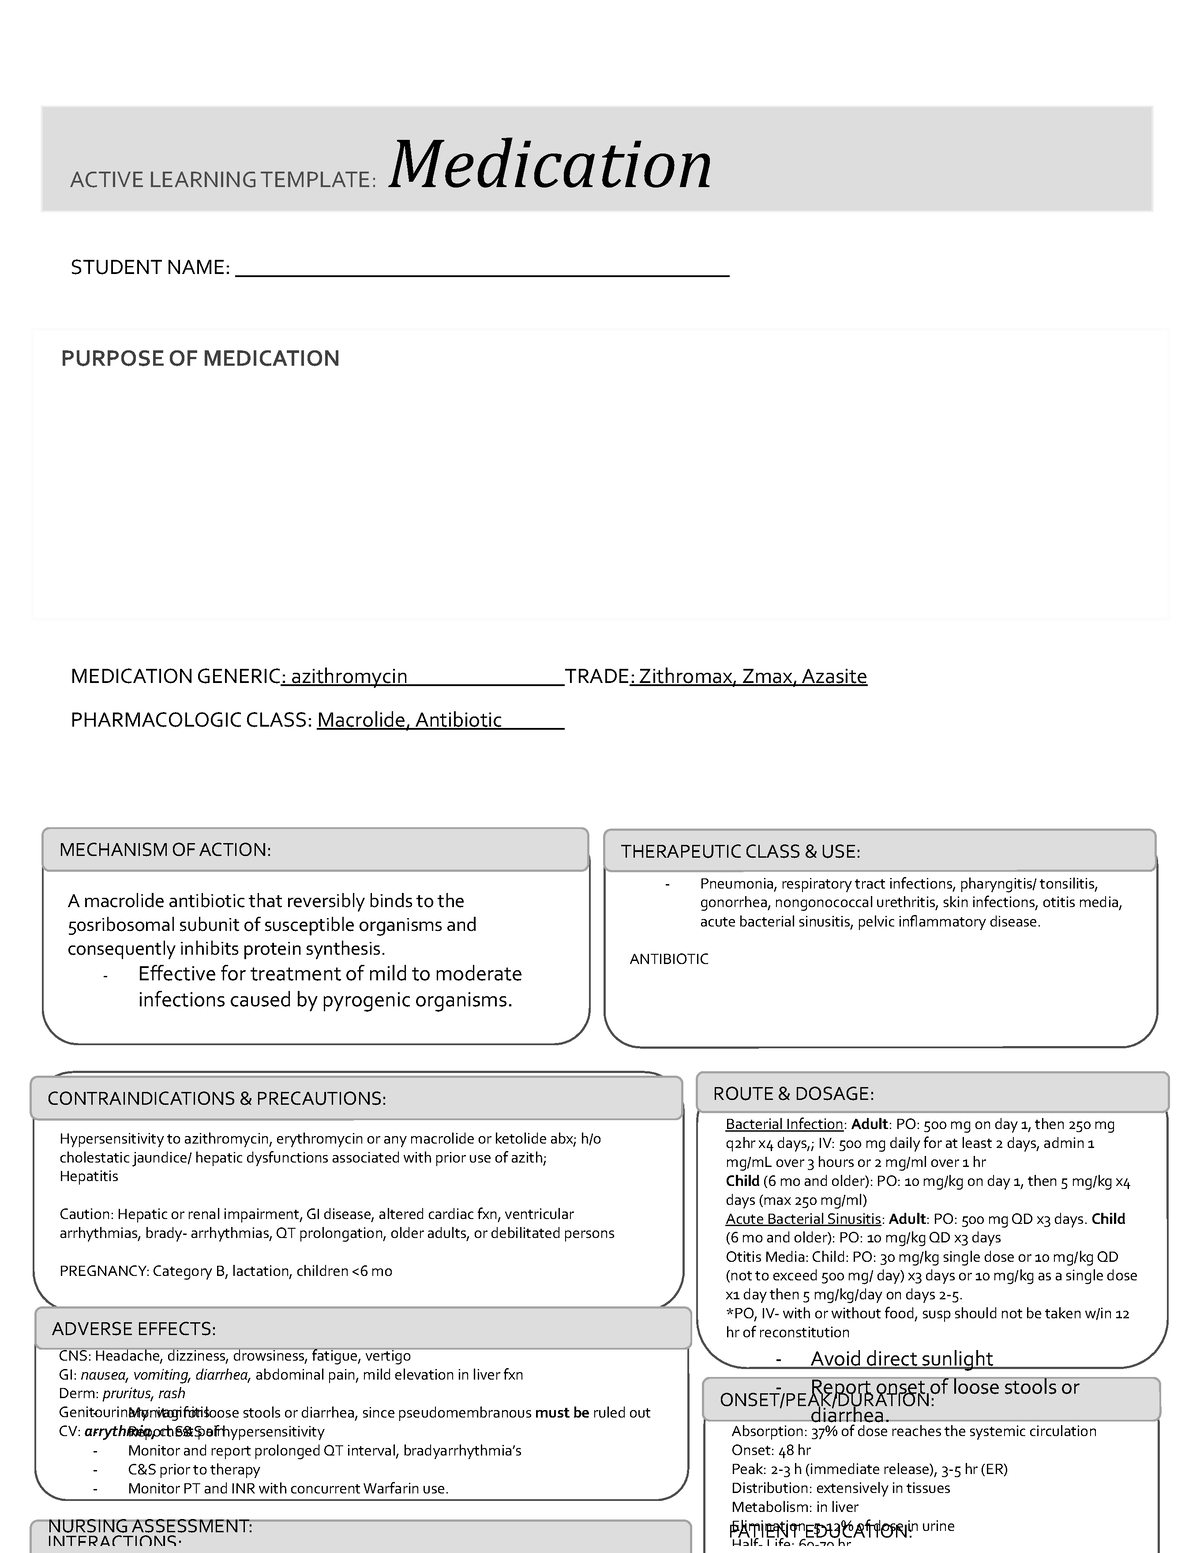 Azithromycin Medcard - notes - STUDENT NAME